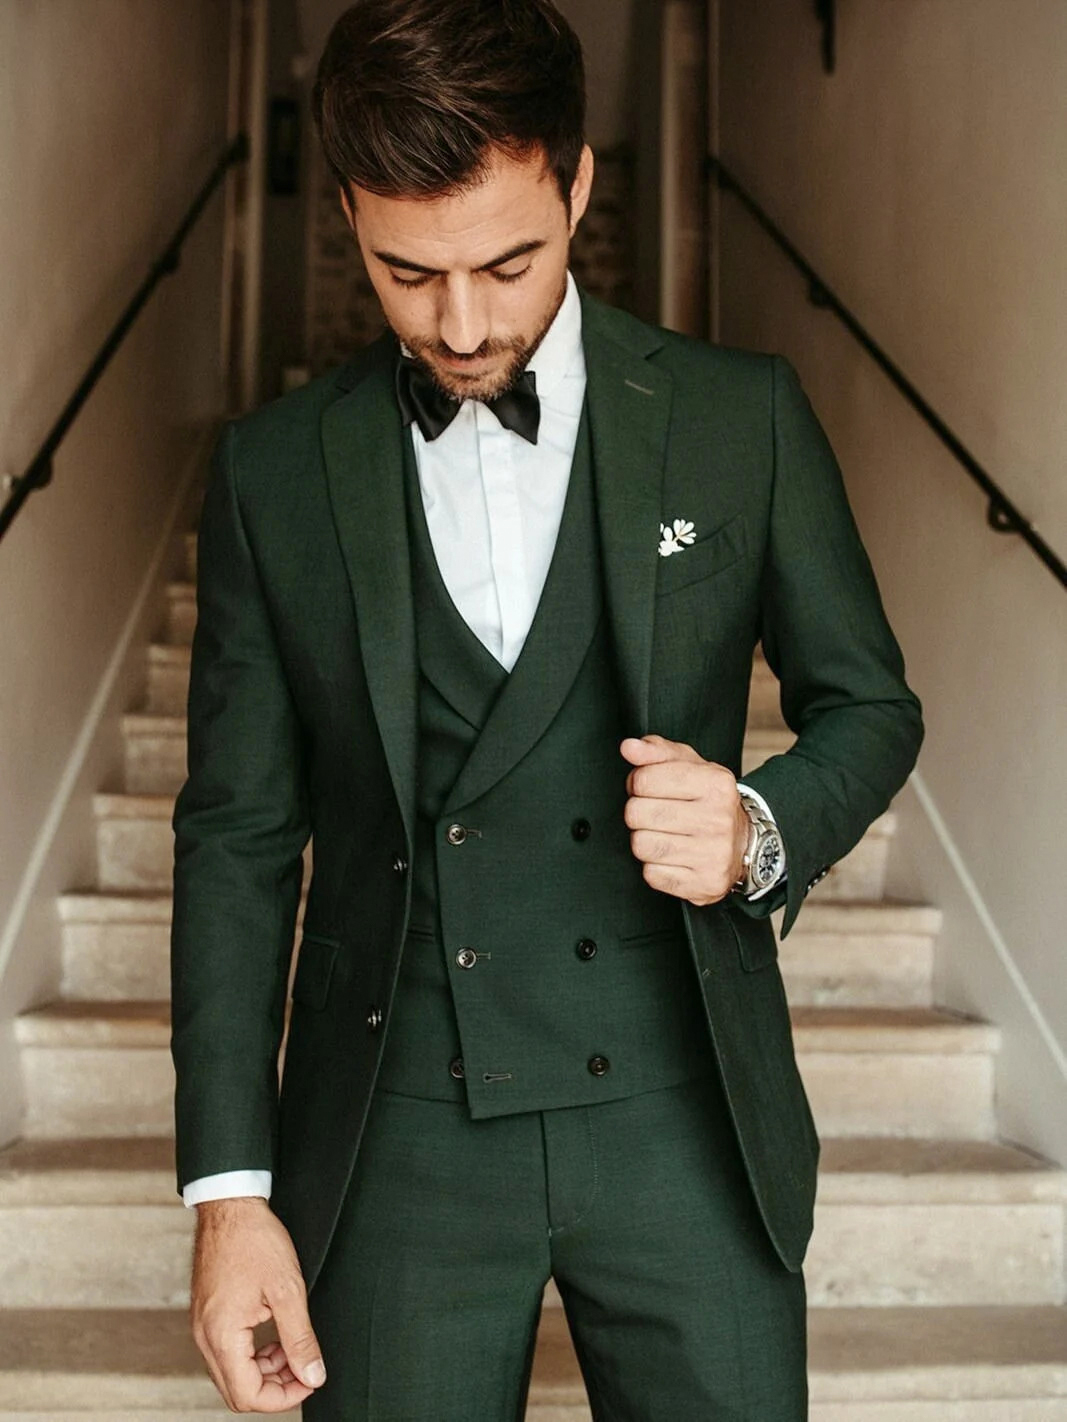 Wearing a dark green suit at a wedding